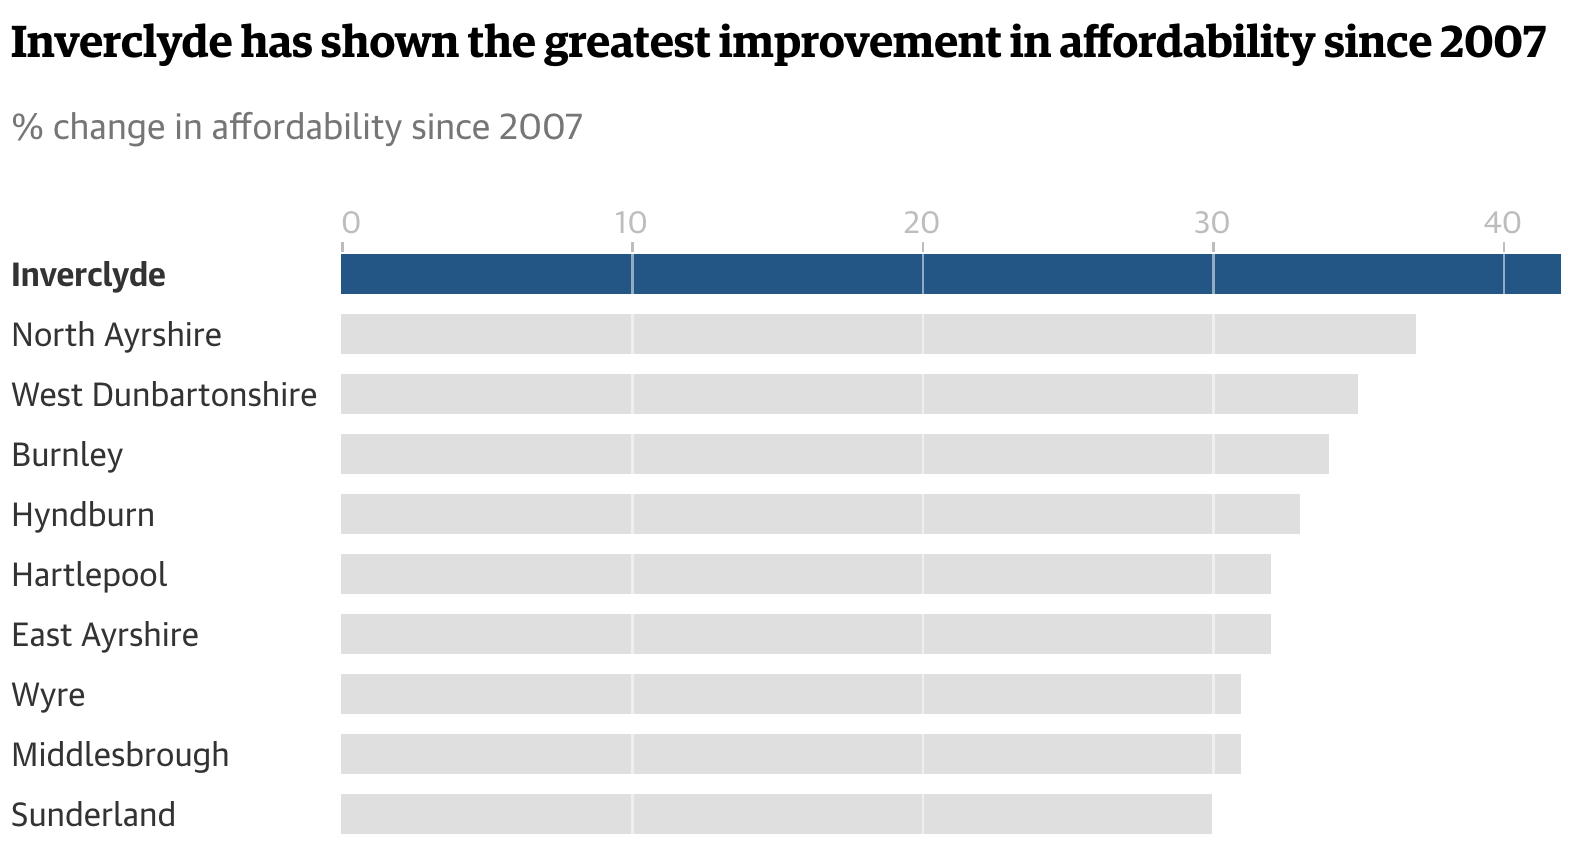 An horizontal bar chart titled Inverclyde has shown the greatest improvement in affordability since 2007, applying the technique of the invisible grid lines